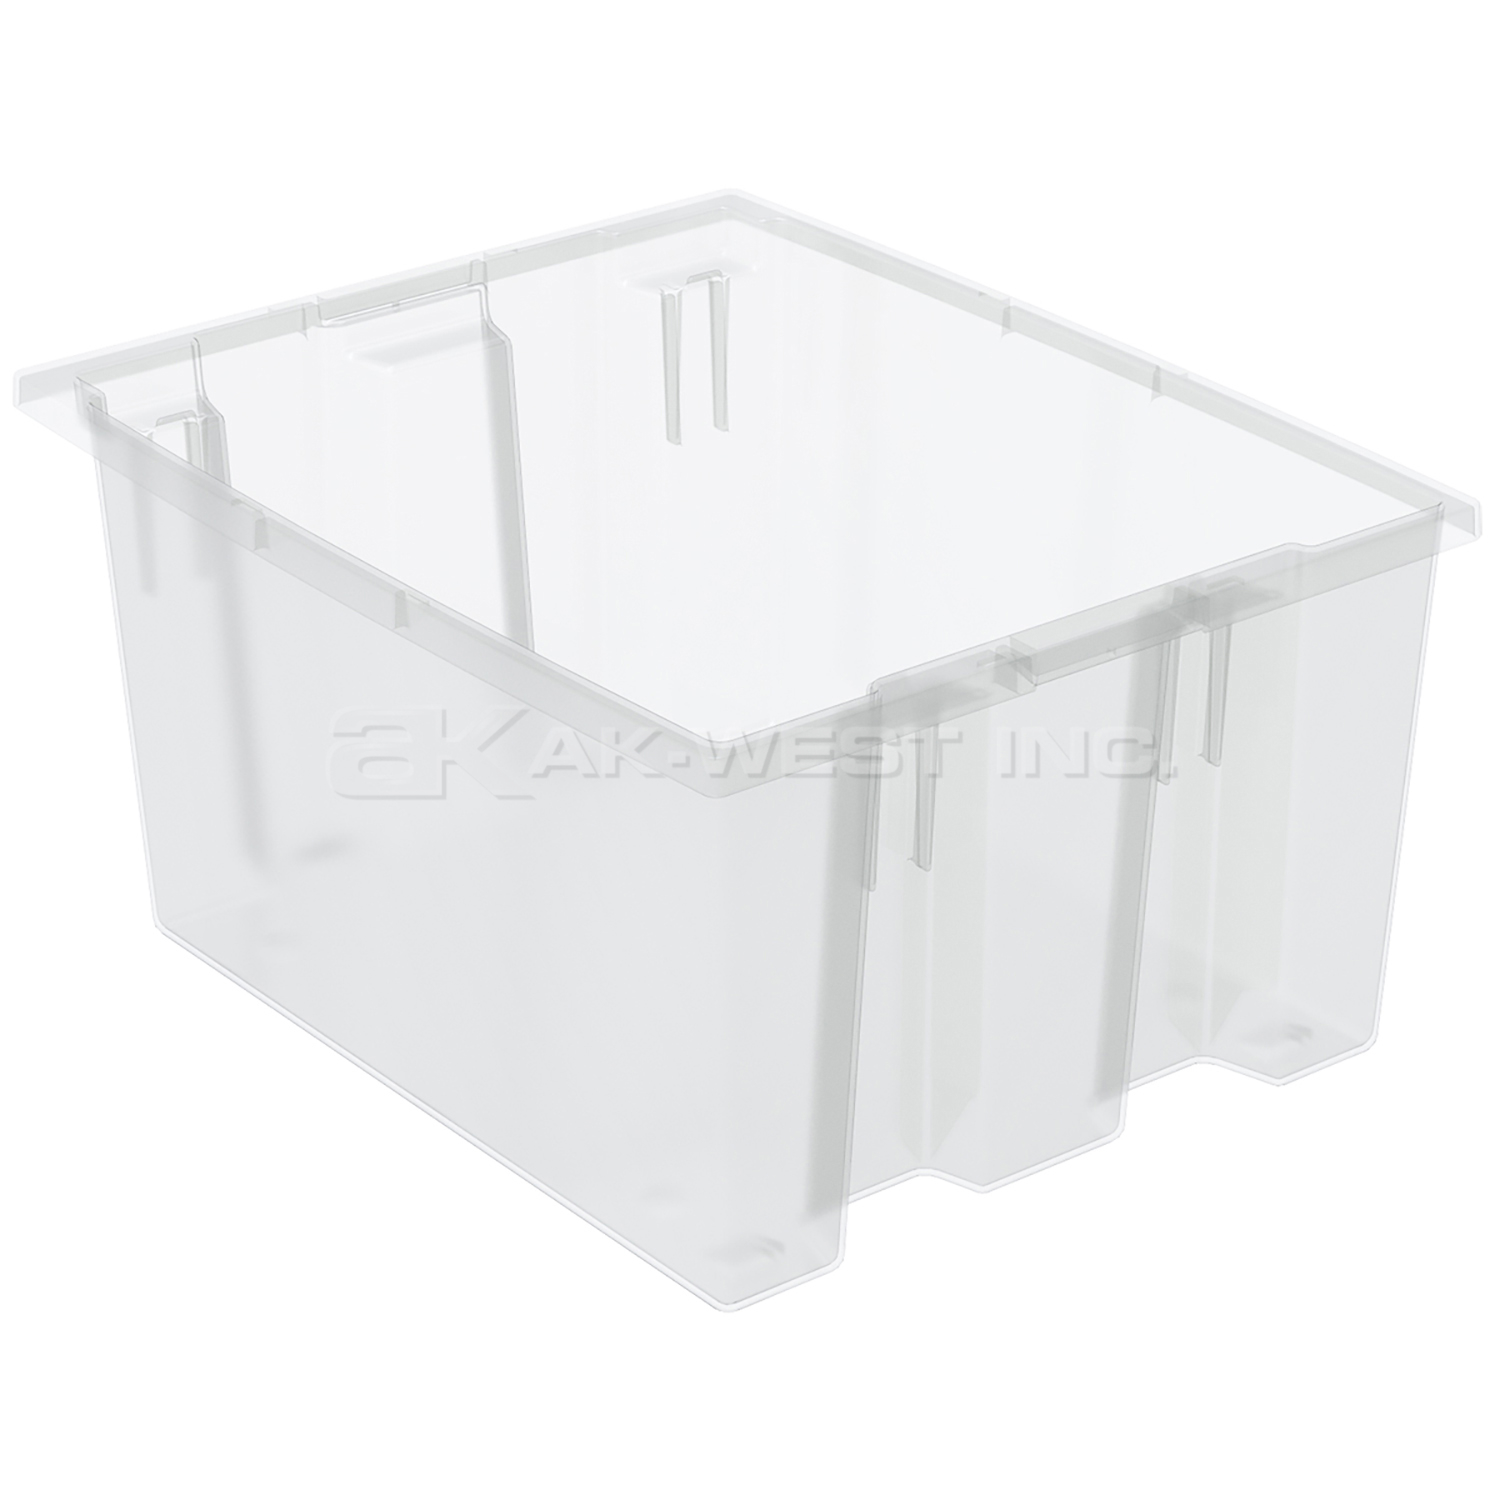 Clear, 19-1/2" x 15-1/2" x 10" Nest and Stack Tote (6 Per Carton)